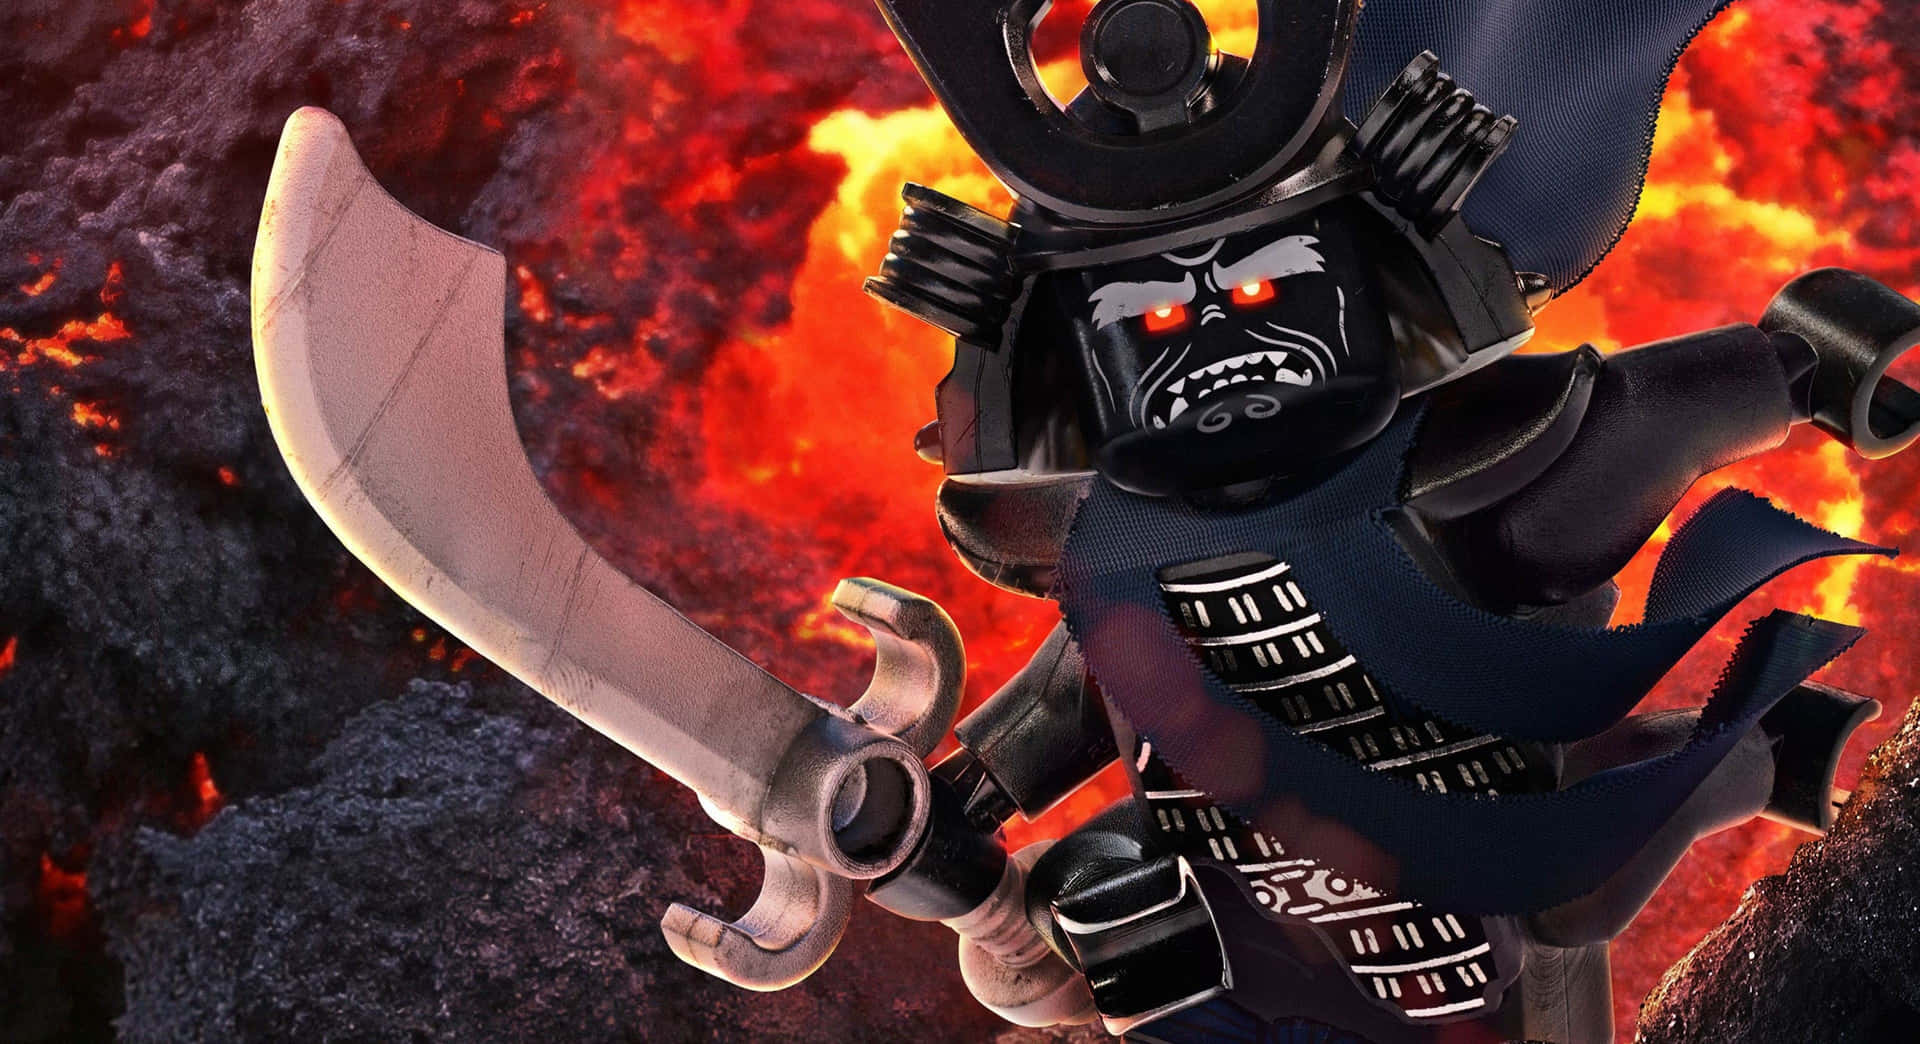 Captivating Ninjago landscape with iconic characters and powerful dragons